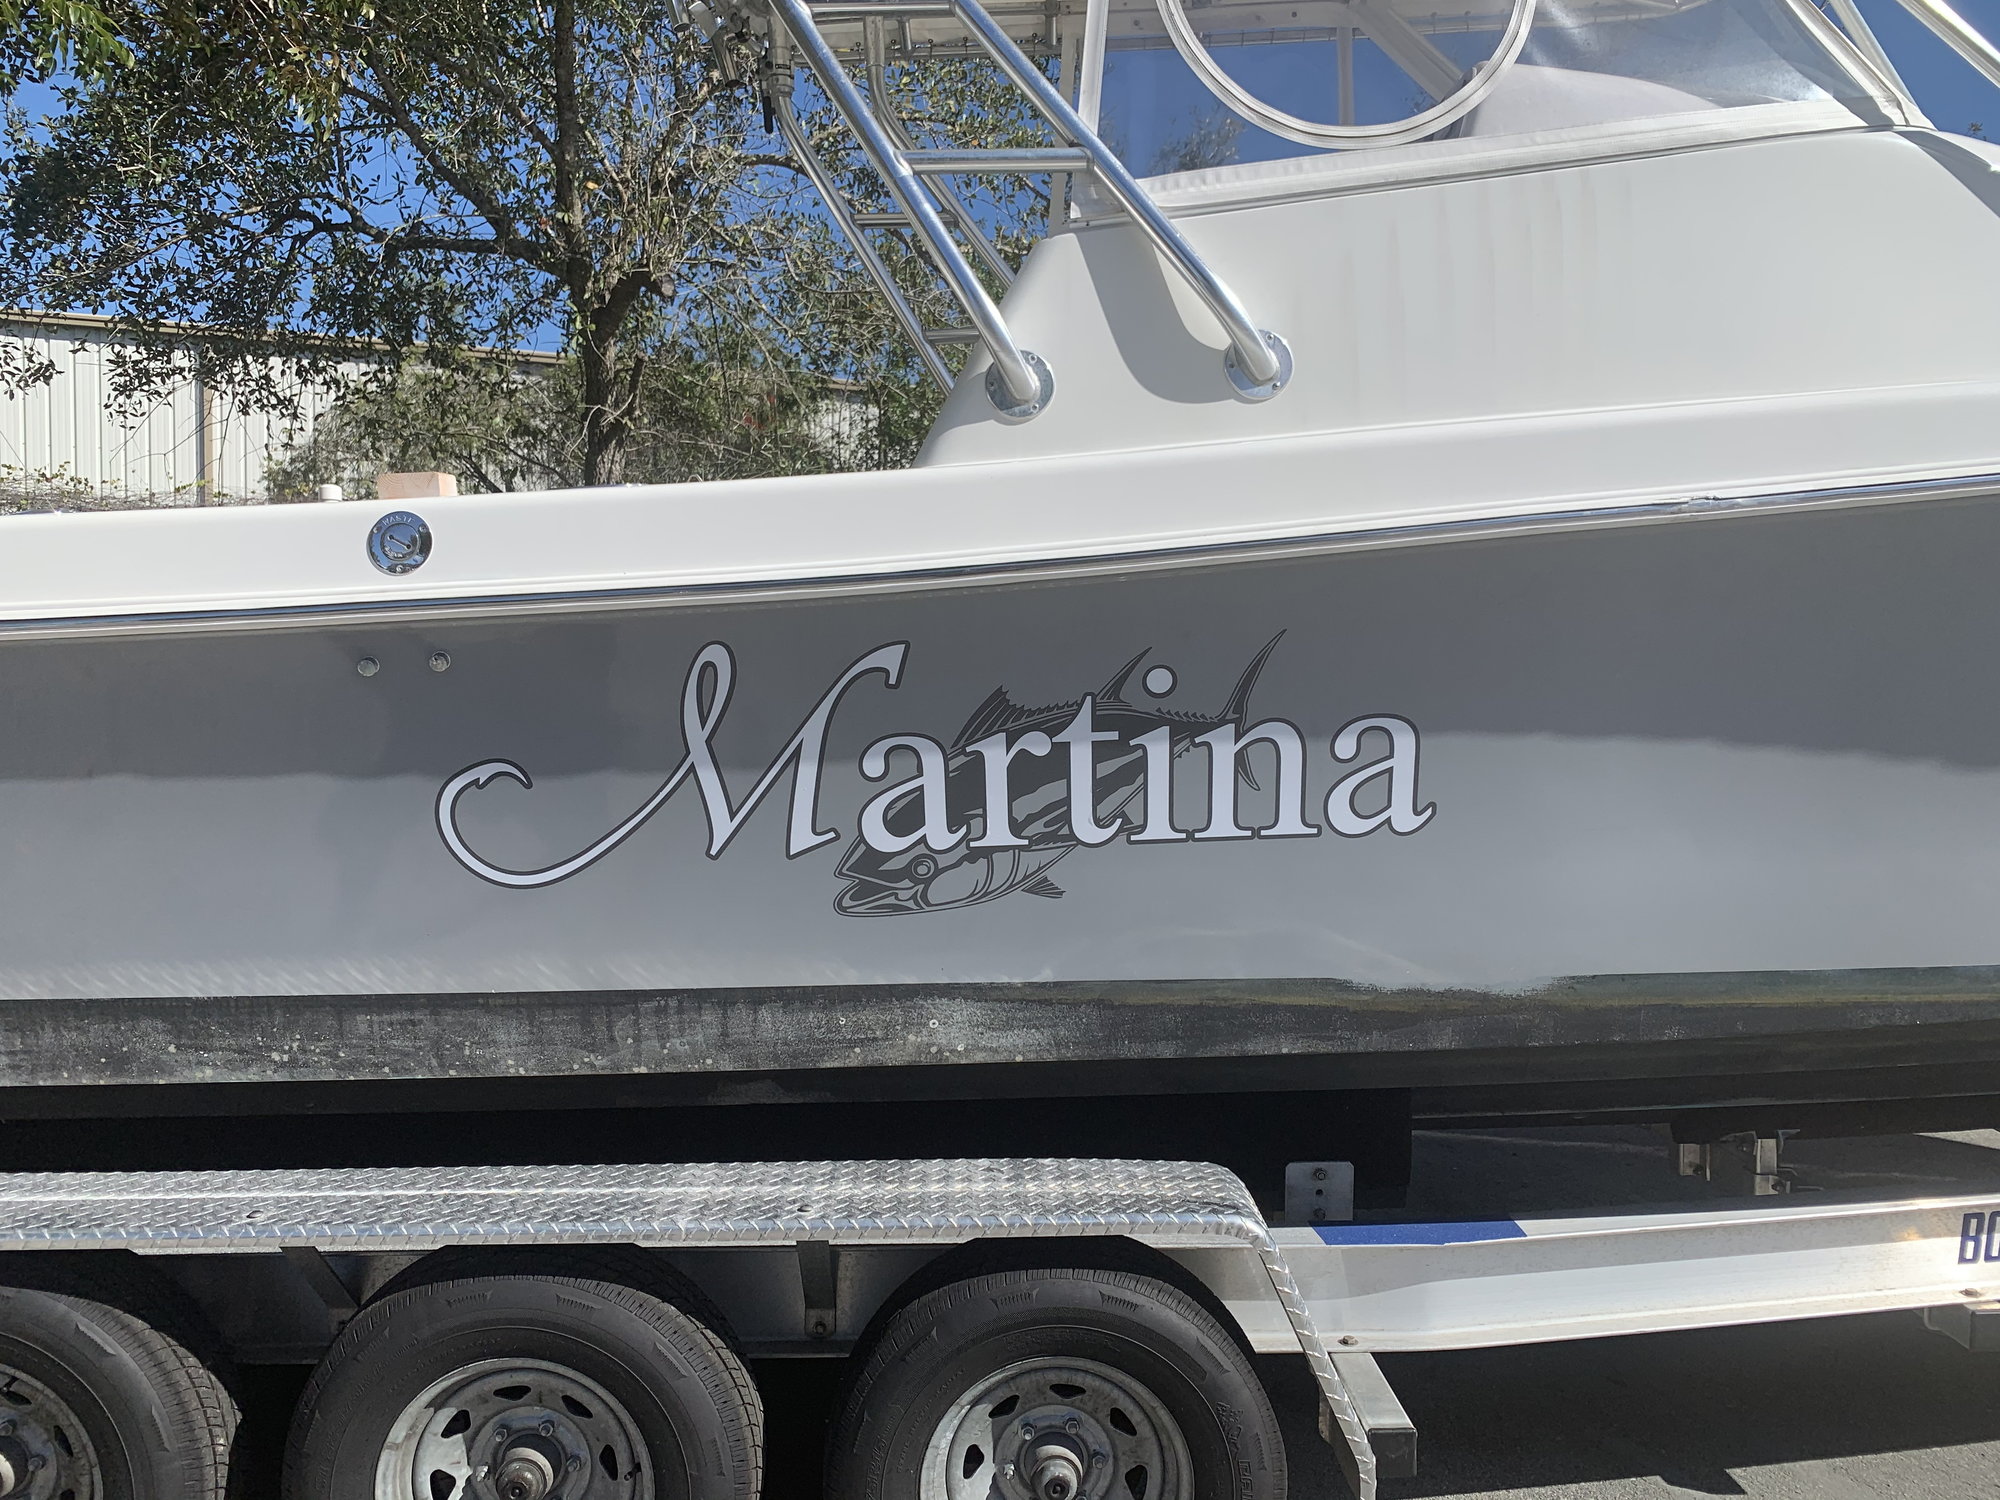 Boat Decals - The Hull Truth - Boating and Fishing Forum